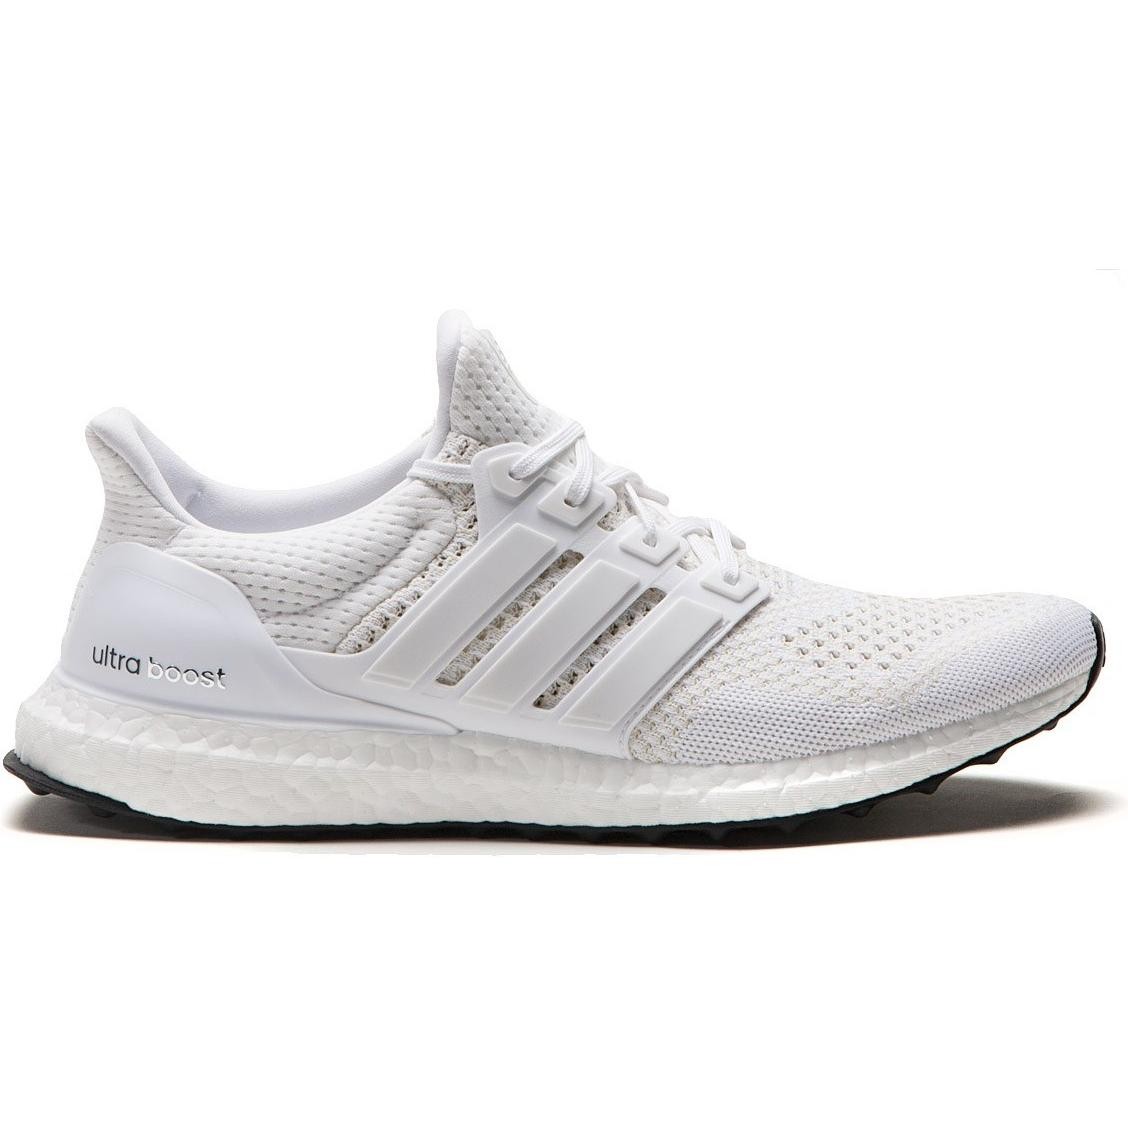 Adidas-Ultra-Boost-sneakers